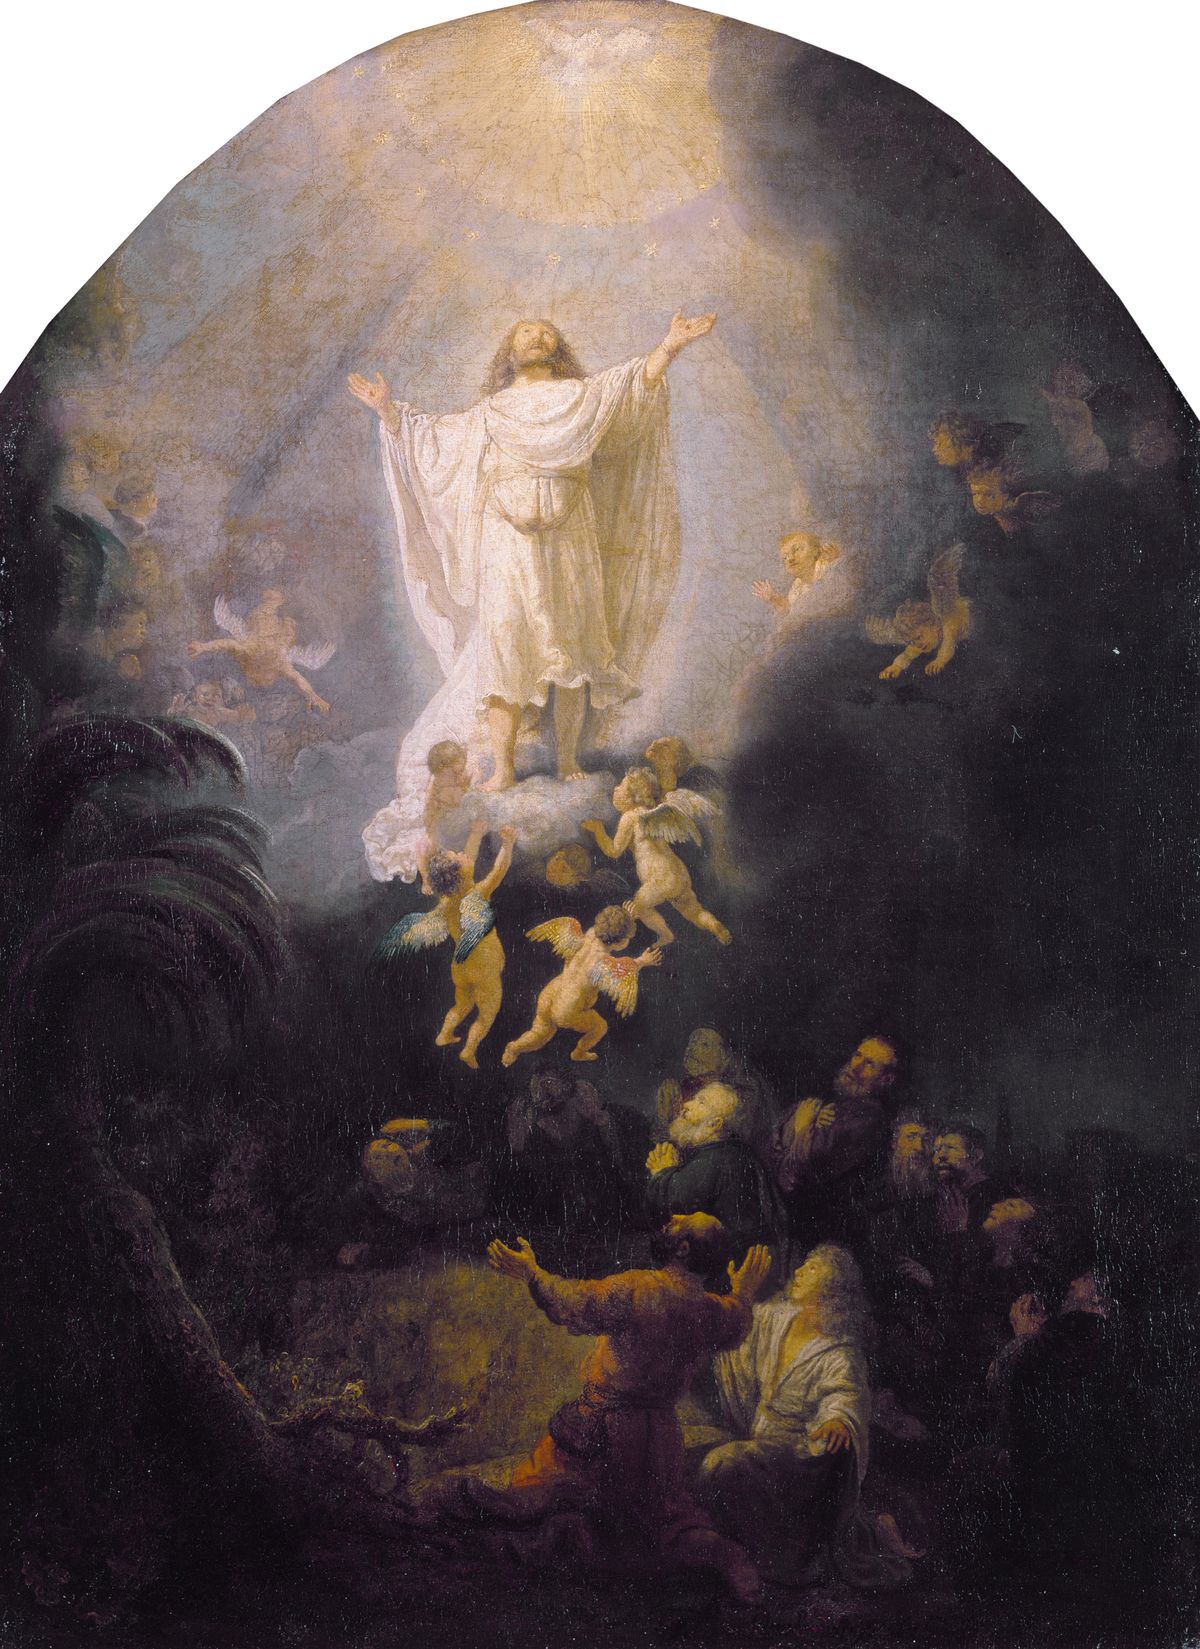 The Ascension (1636) by Rembrandt - Public Domain Bible Painting